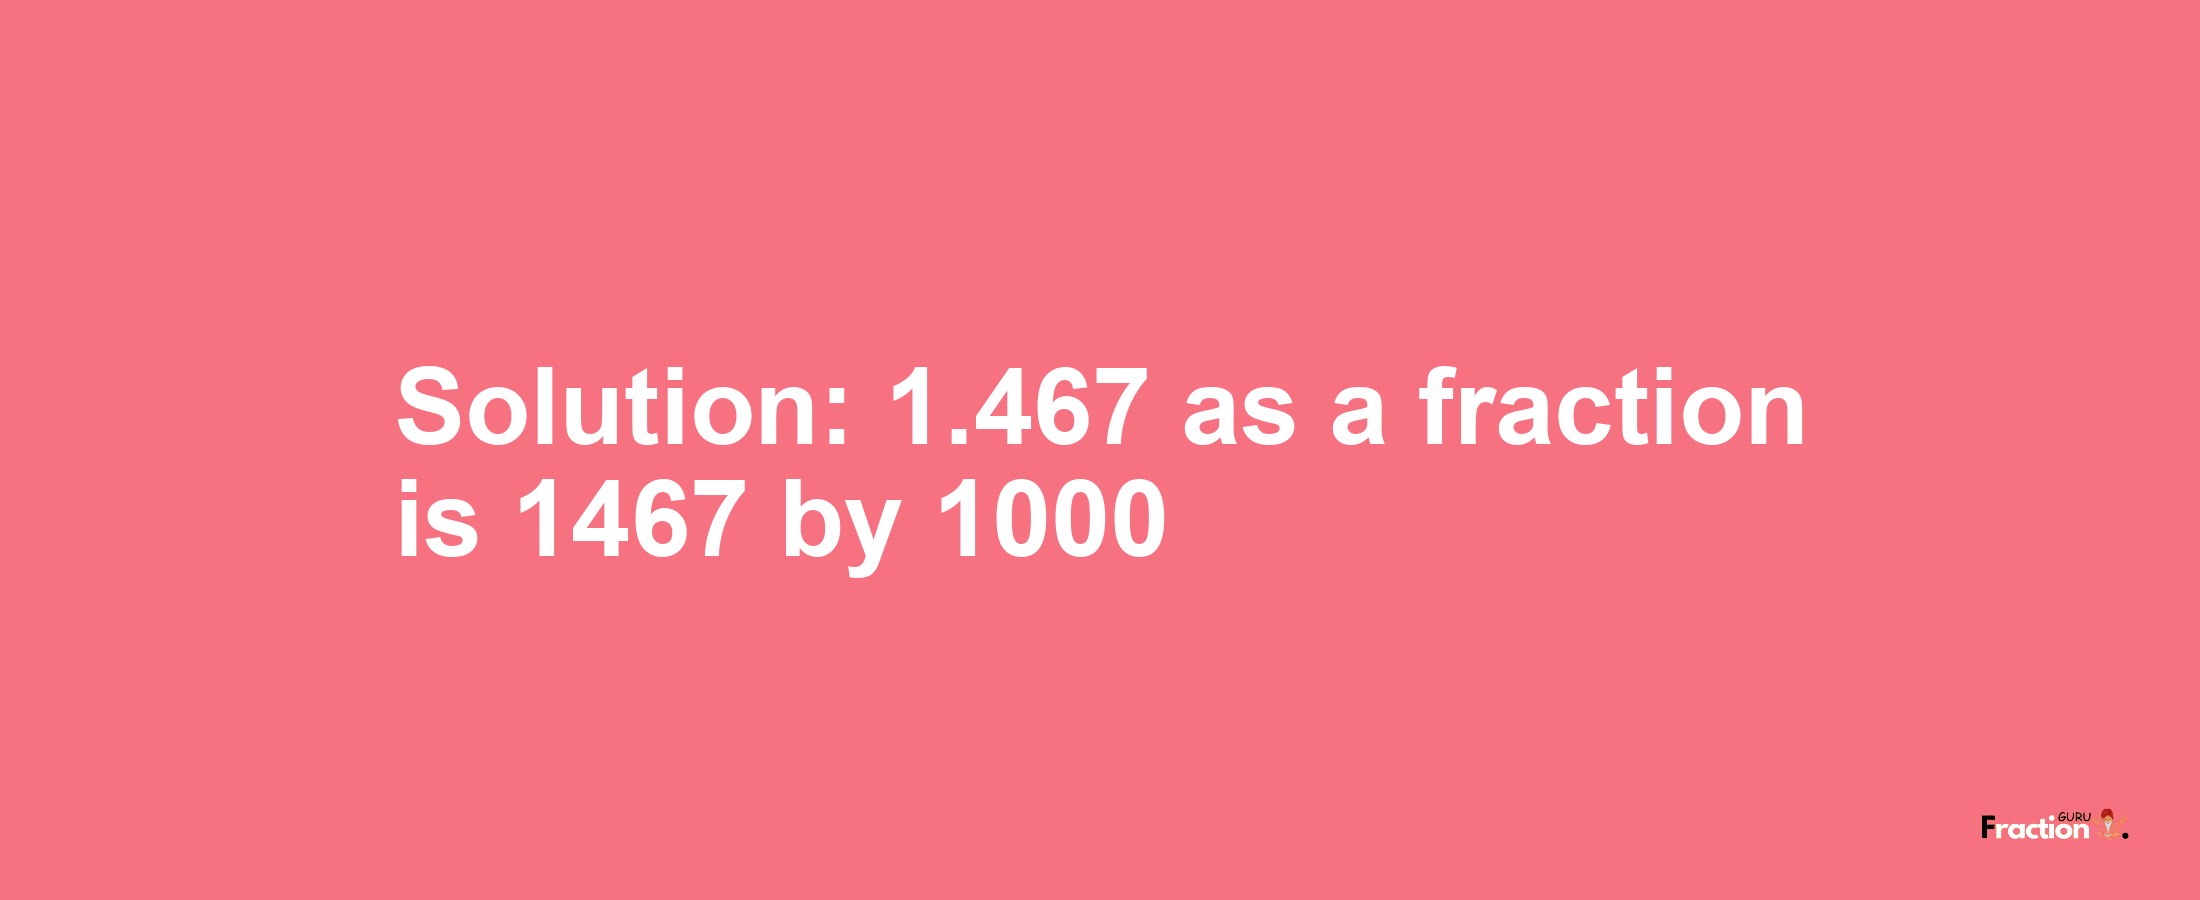 Solution:1.467 as a fraction is 1467/1000